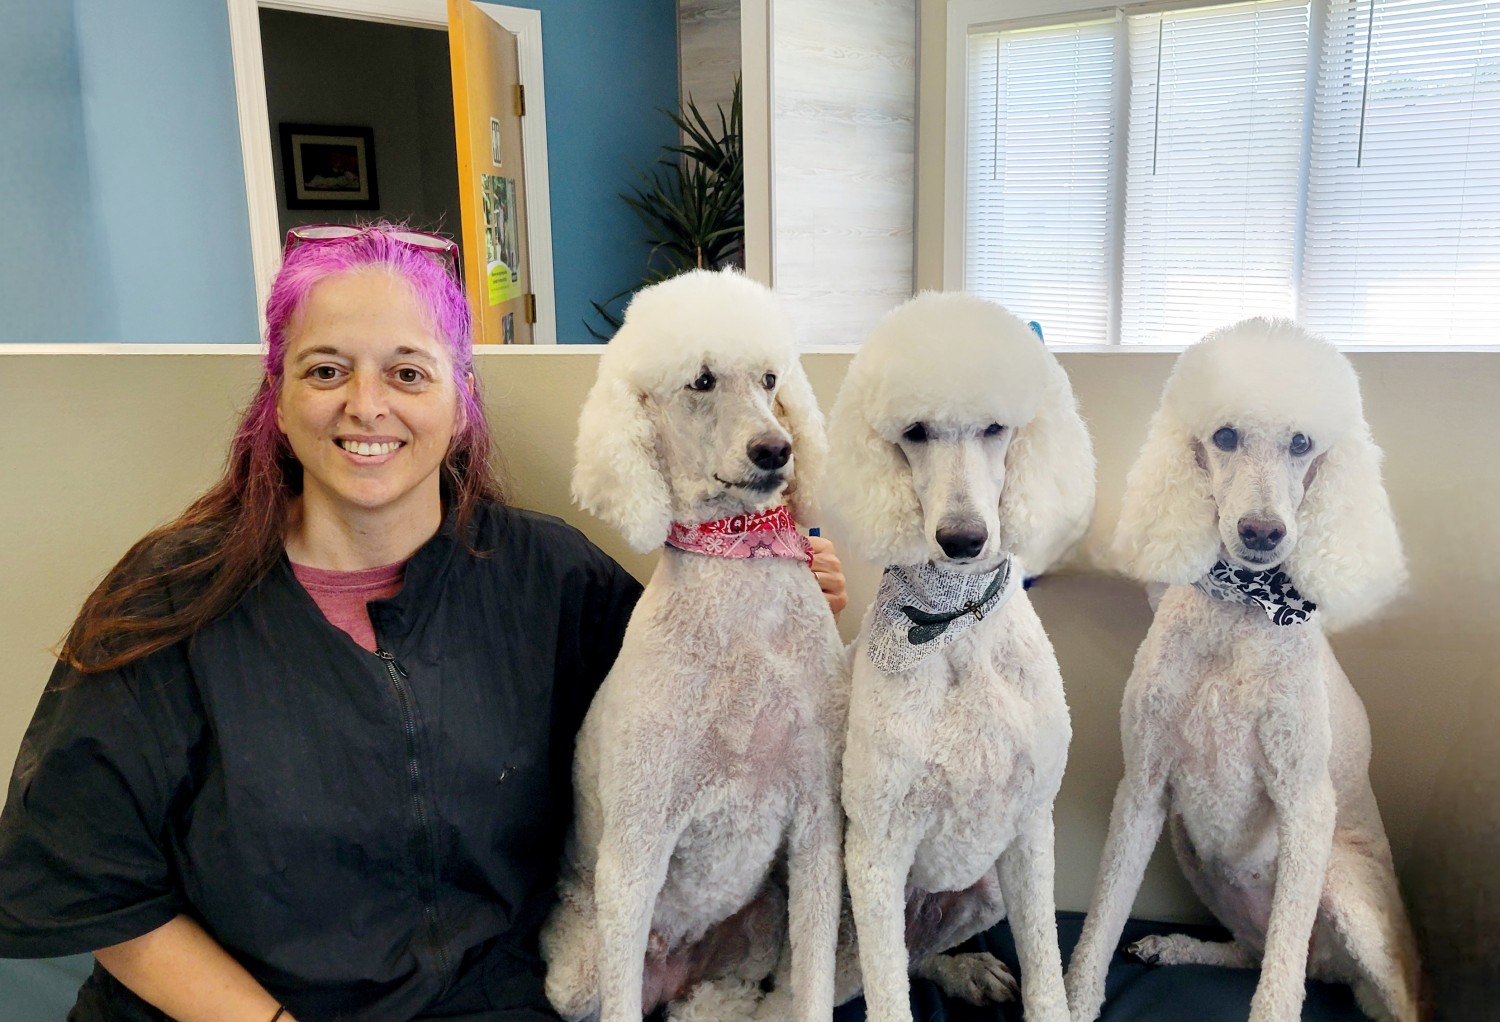 Groomer with groomed poodles